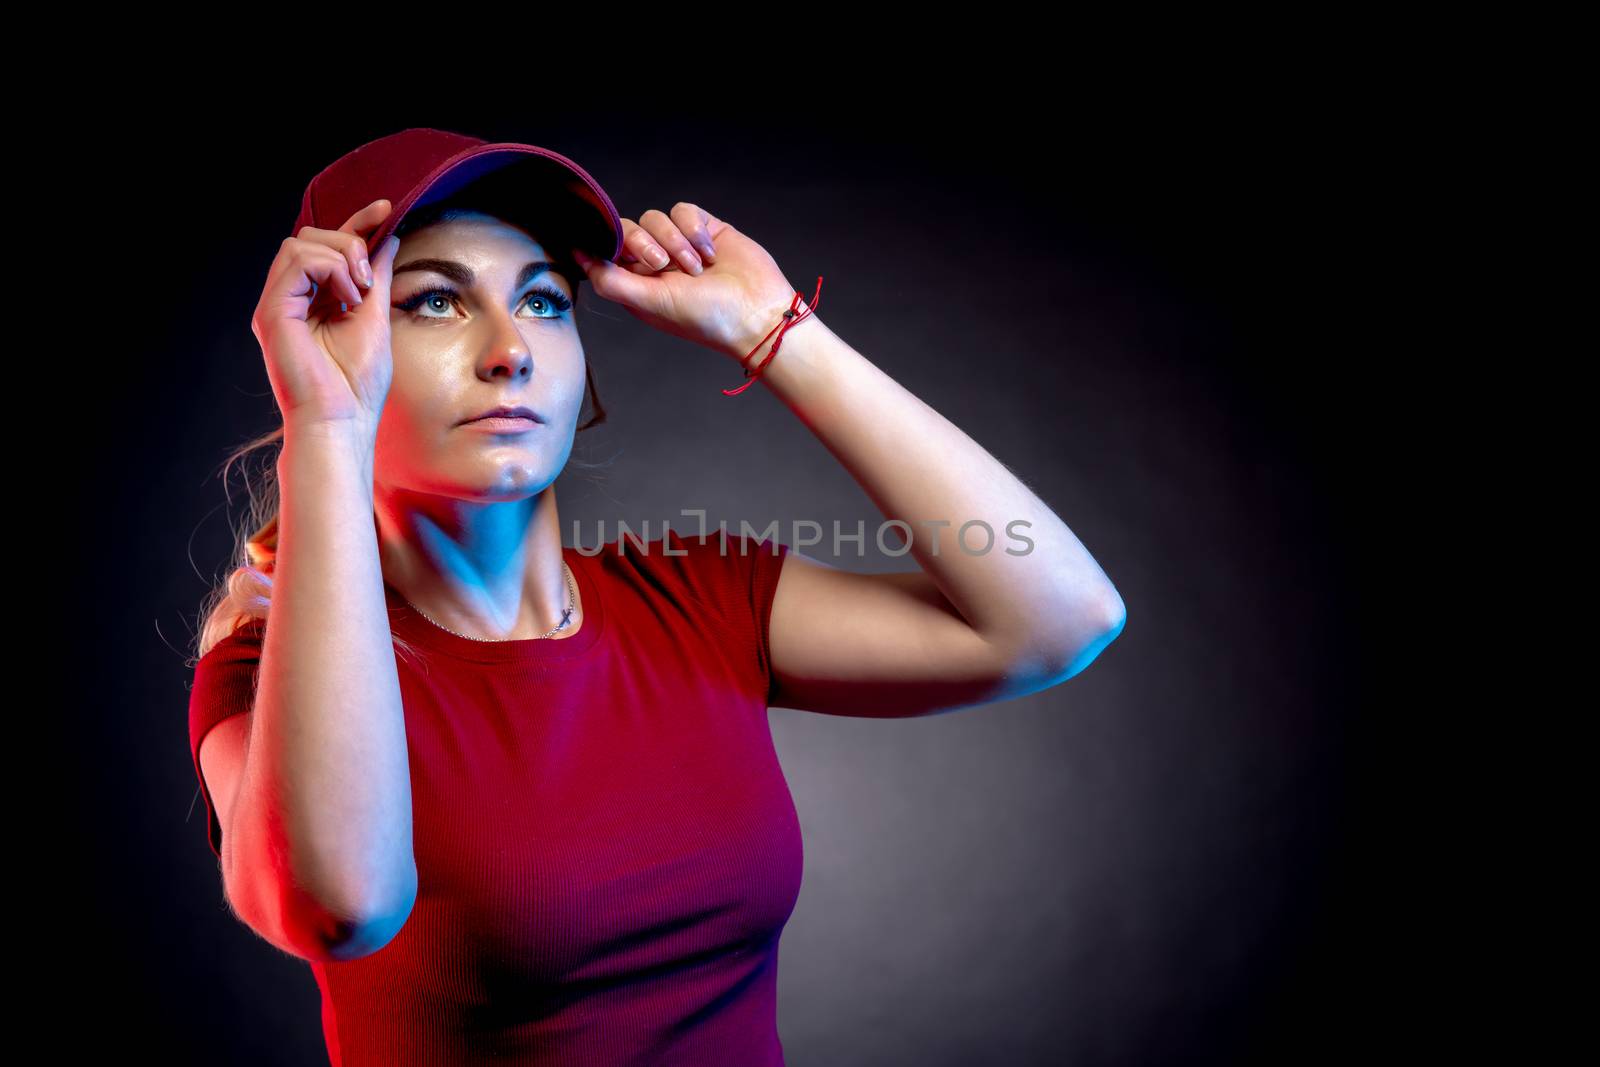 Portrait of a woman in a baseball cap on a black background. red and blue color illuminates the figure by Edophoto